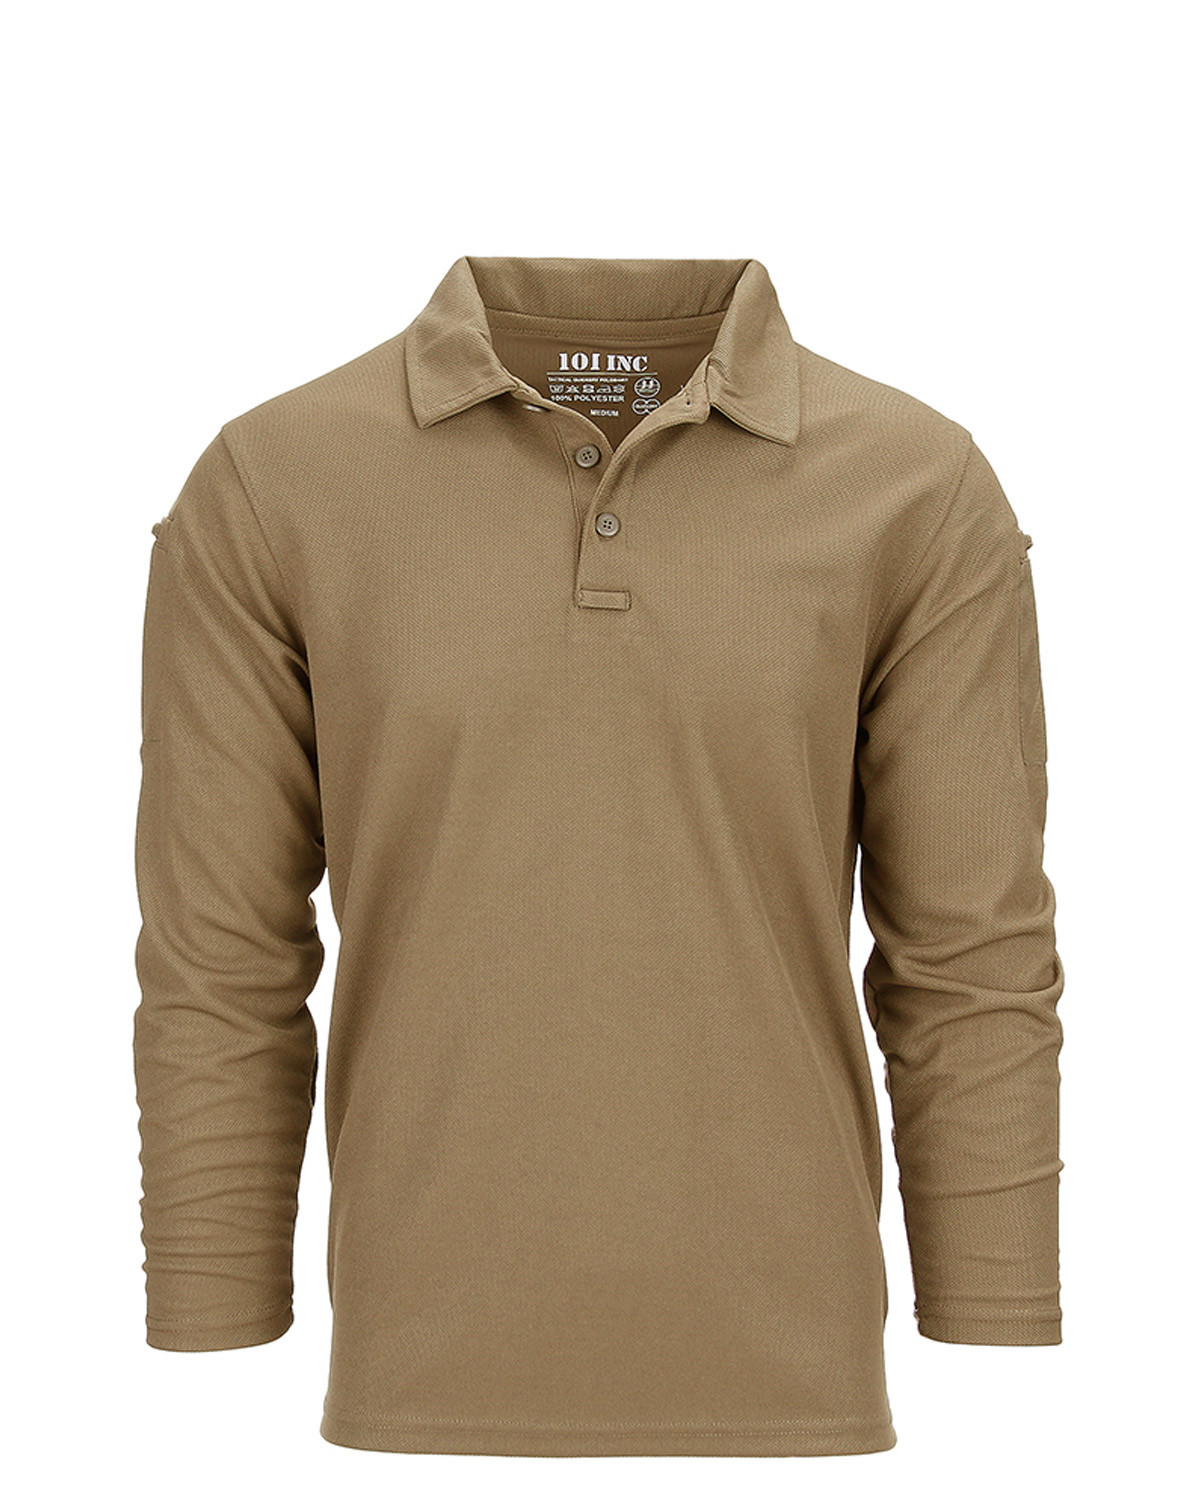 Fostex Tactical Polo Quick Dry Long Sleeve (Coyote Brun, XL)